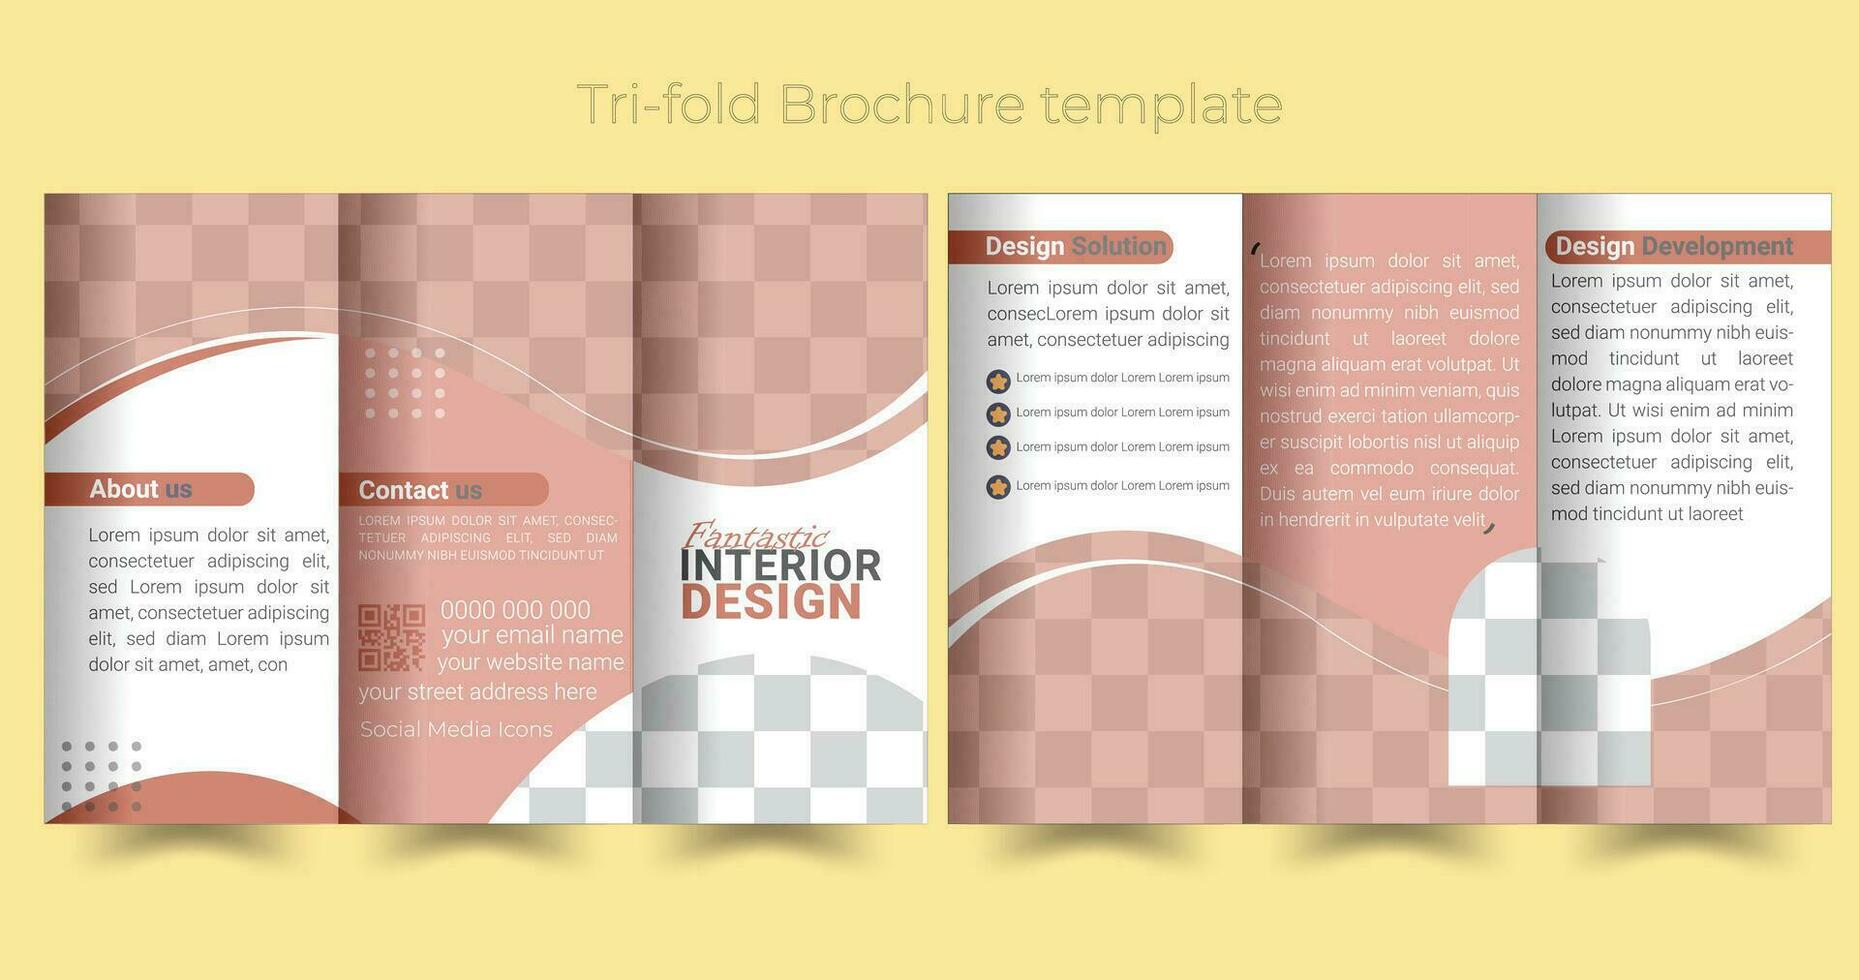 Trifold brochure template for business modern design Free Vector